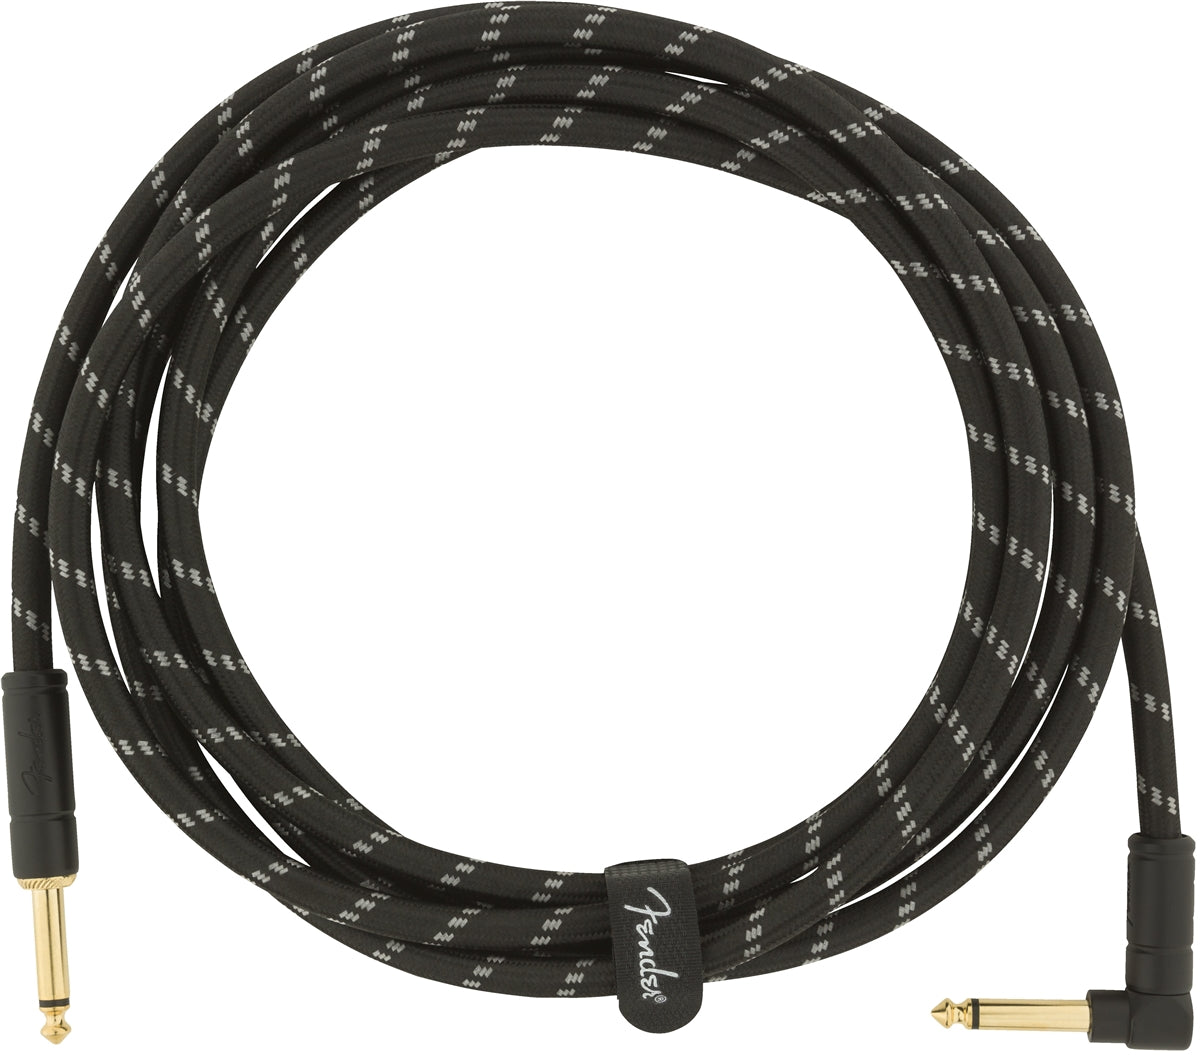 Fender Deluxe Series Straight - Right Angle Instrument Cable 10ft - Black Tweed